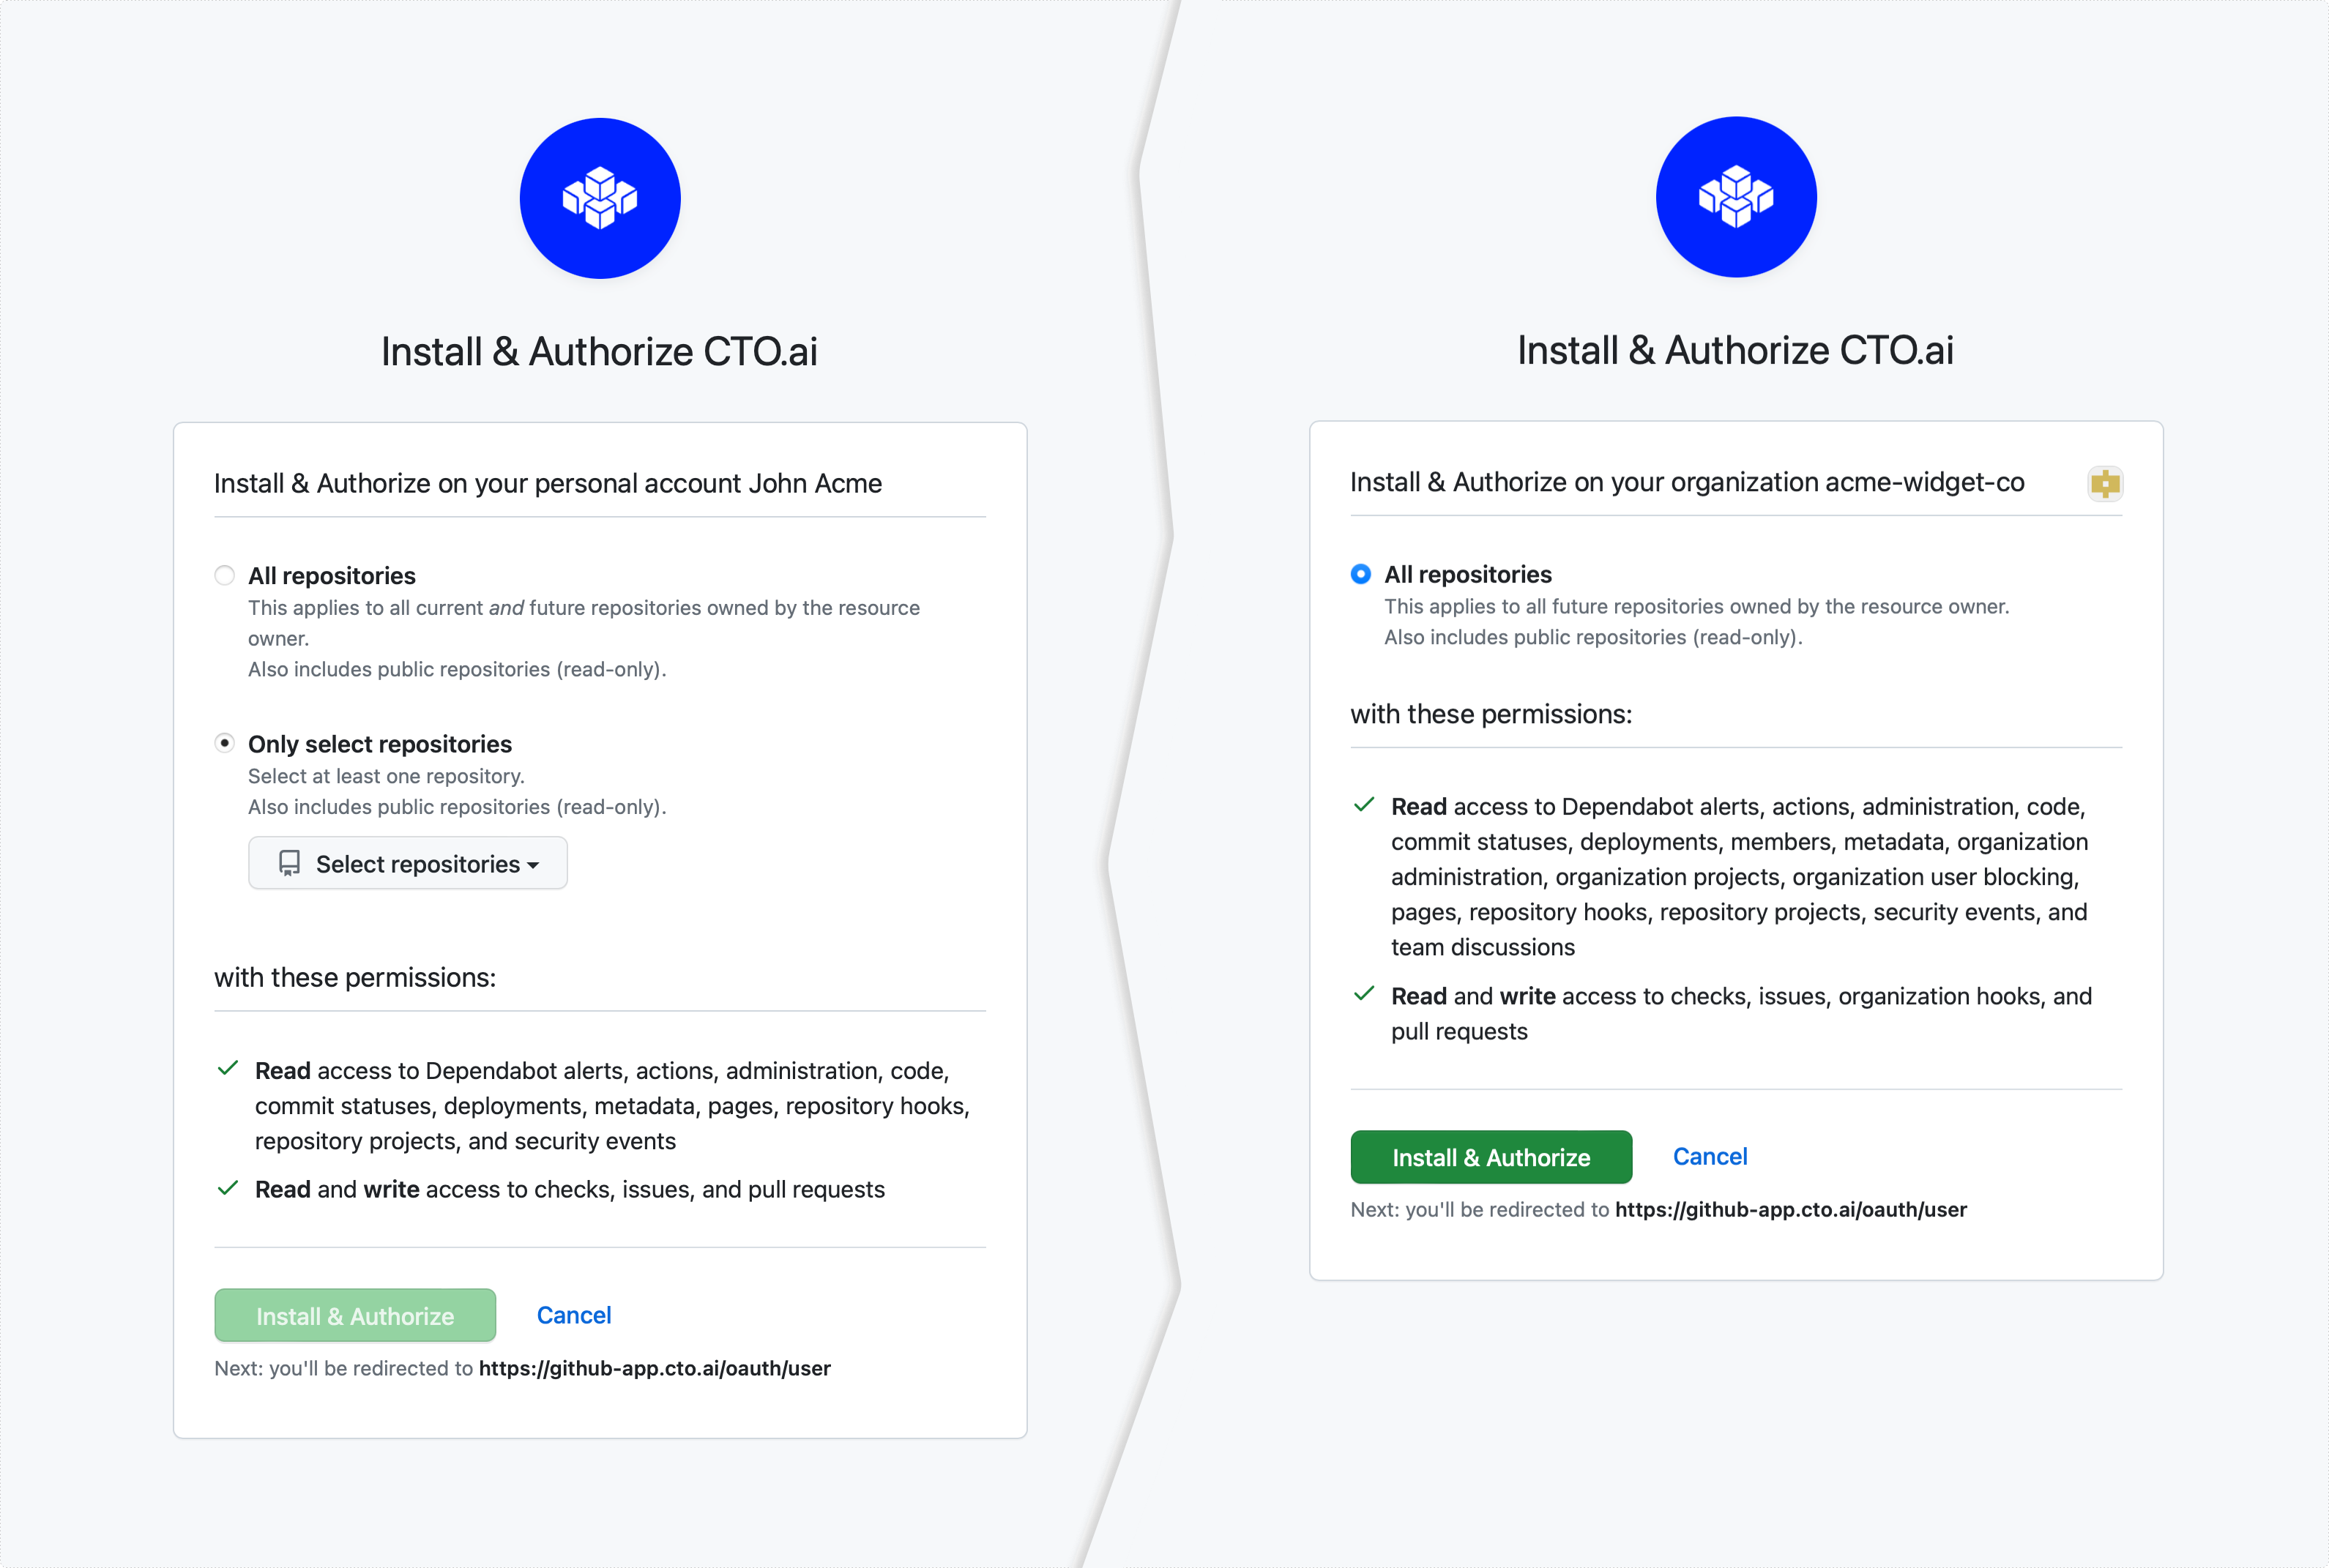 **Left:** "Install & Authorize" screen as displayed when connecting to your individual user account.

**Right:** "Install & Authorize" screen as displayed when connecting to a GitHub organization that doesn't yet own any repositories.